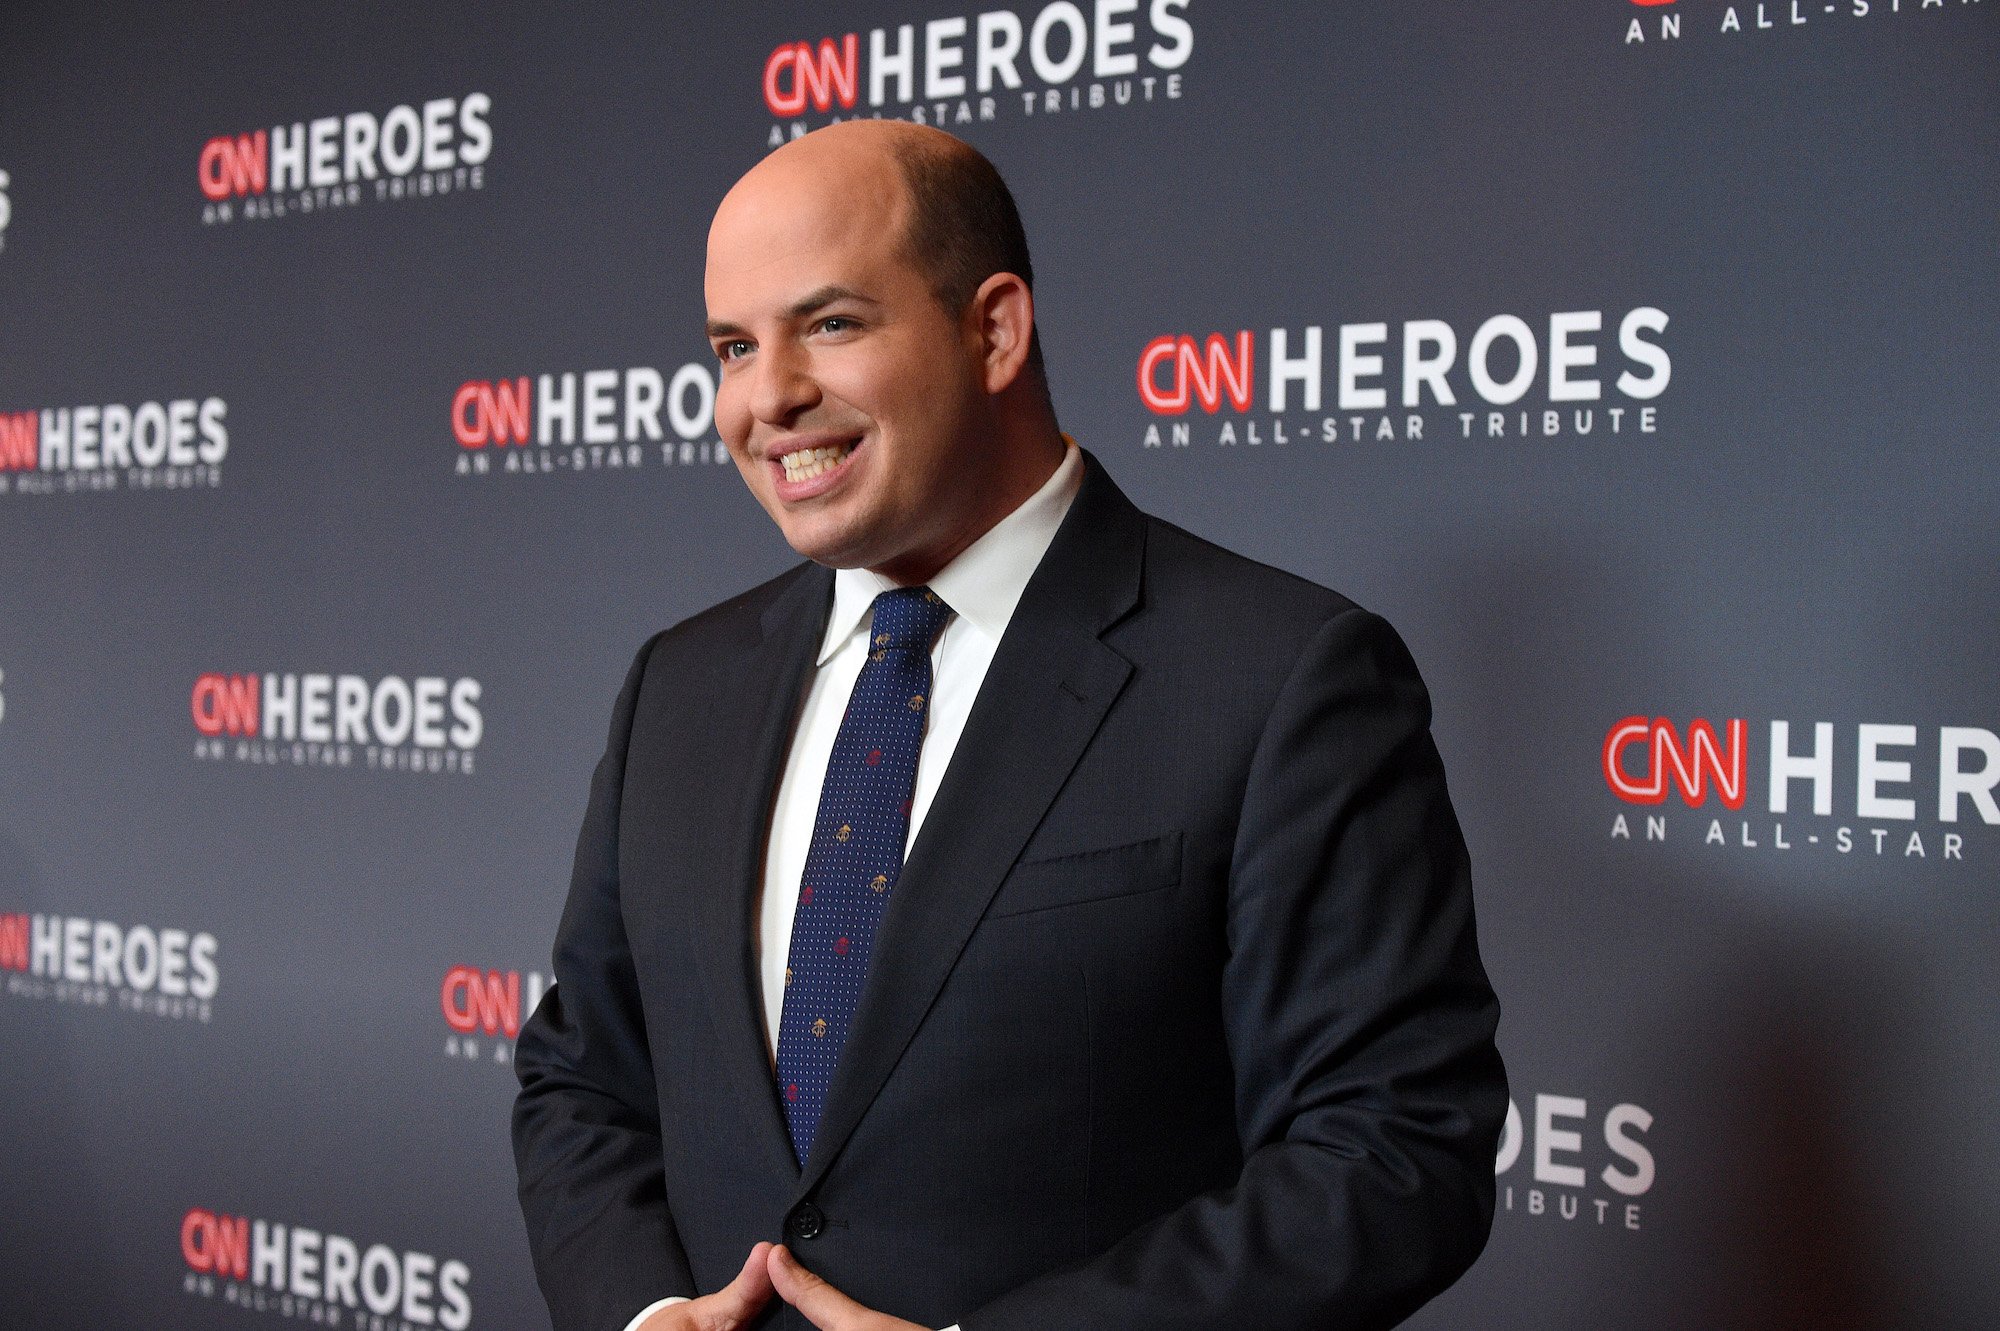 Brian Stelter smiling in front of a dark blue background